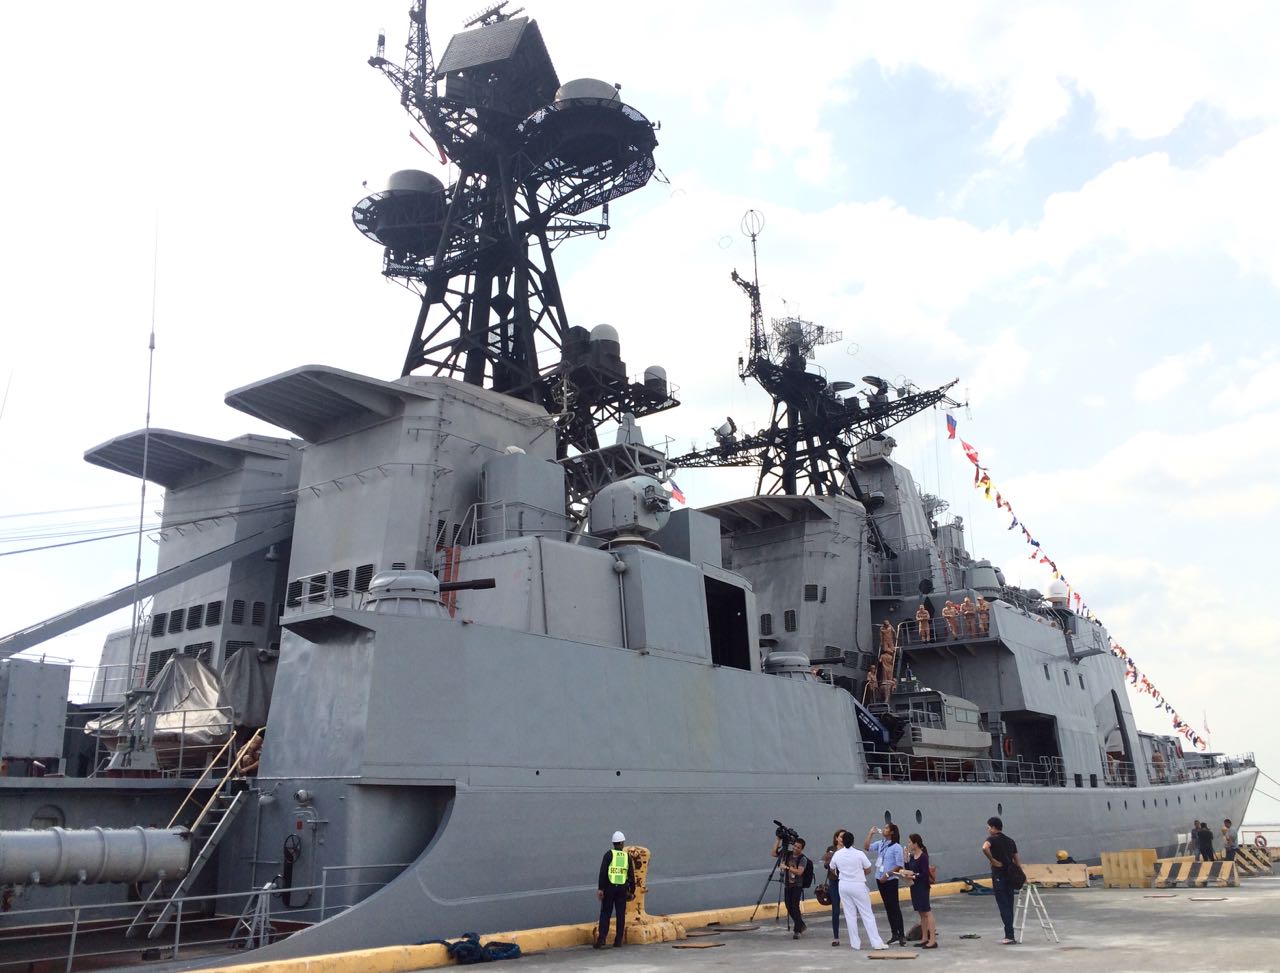 Russian Navy vessels to dock in Manila for 5-day goodwill visit